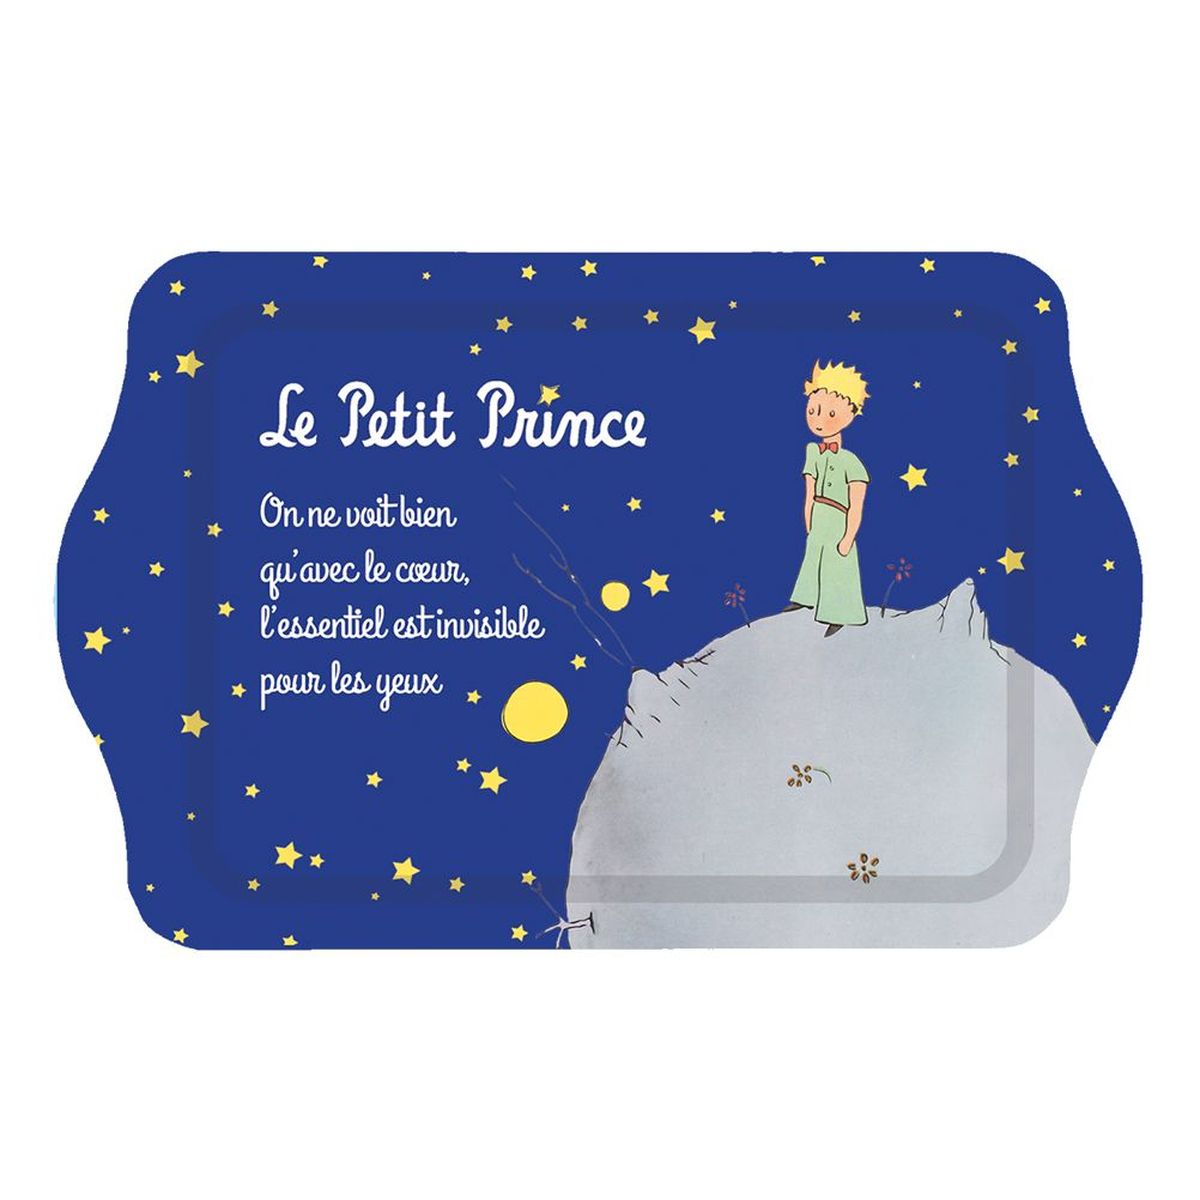 The Little Prince of St Exupery little tray 20 x 14 cm